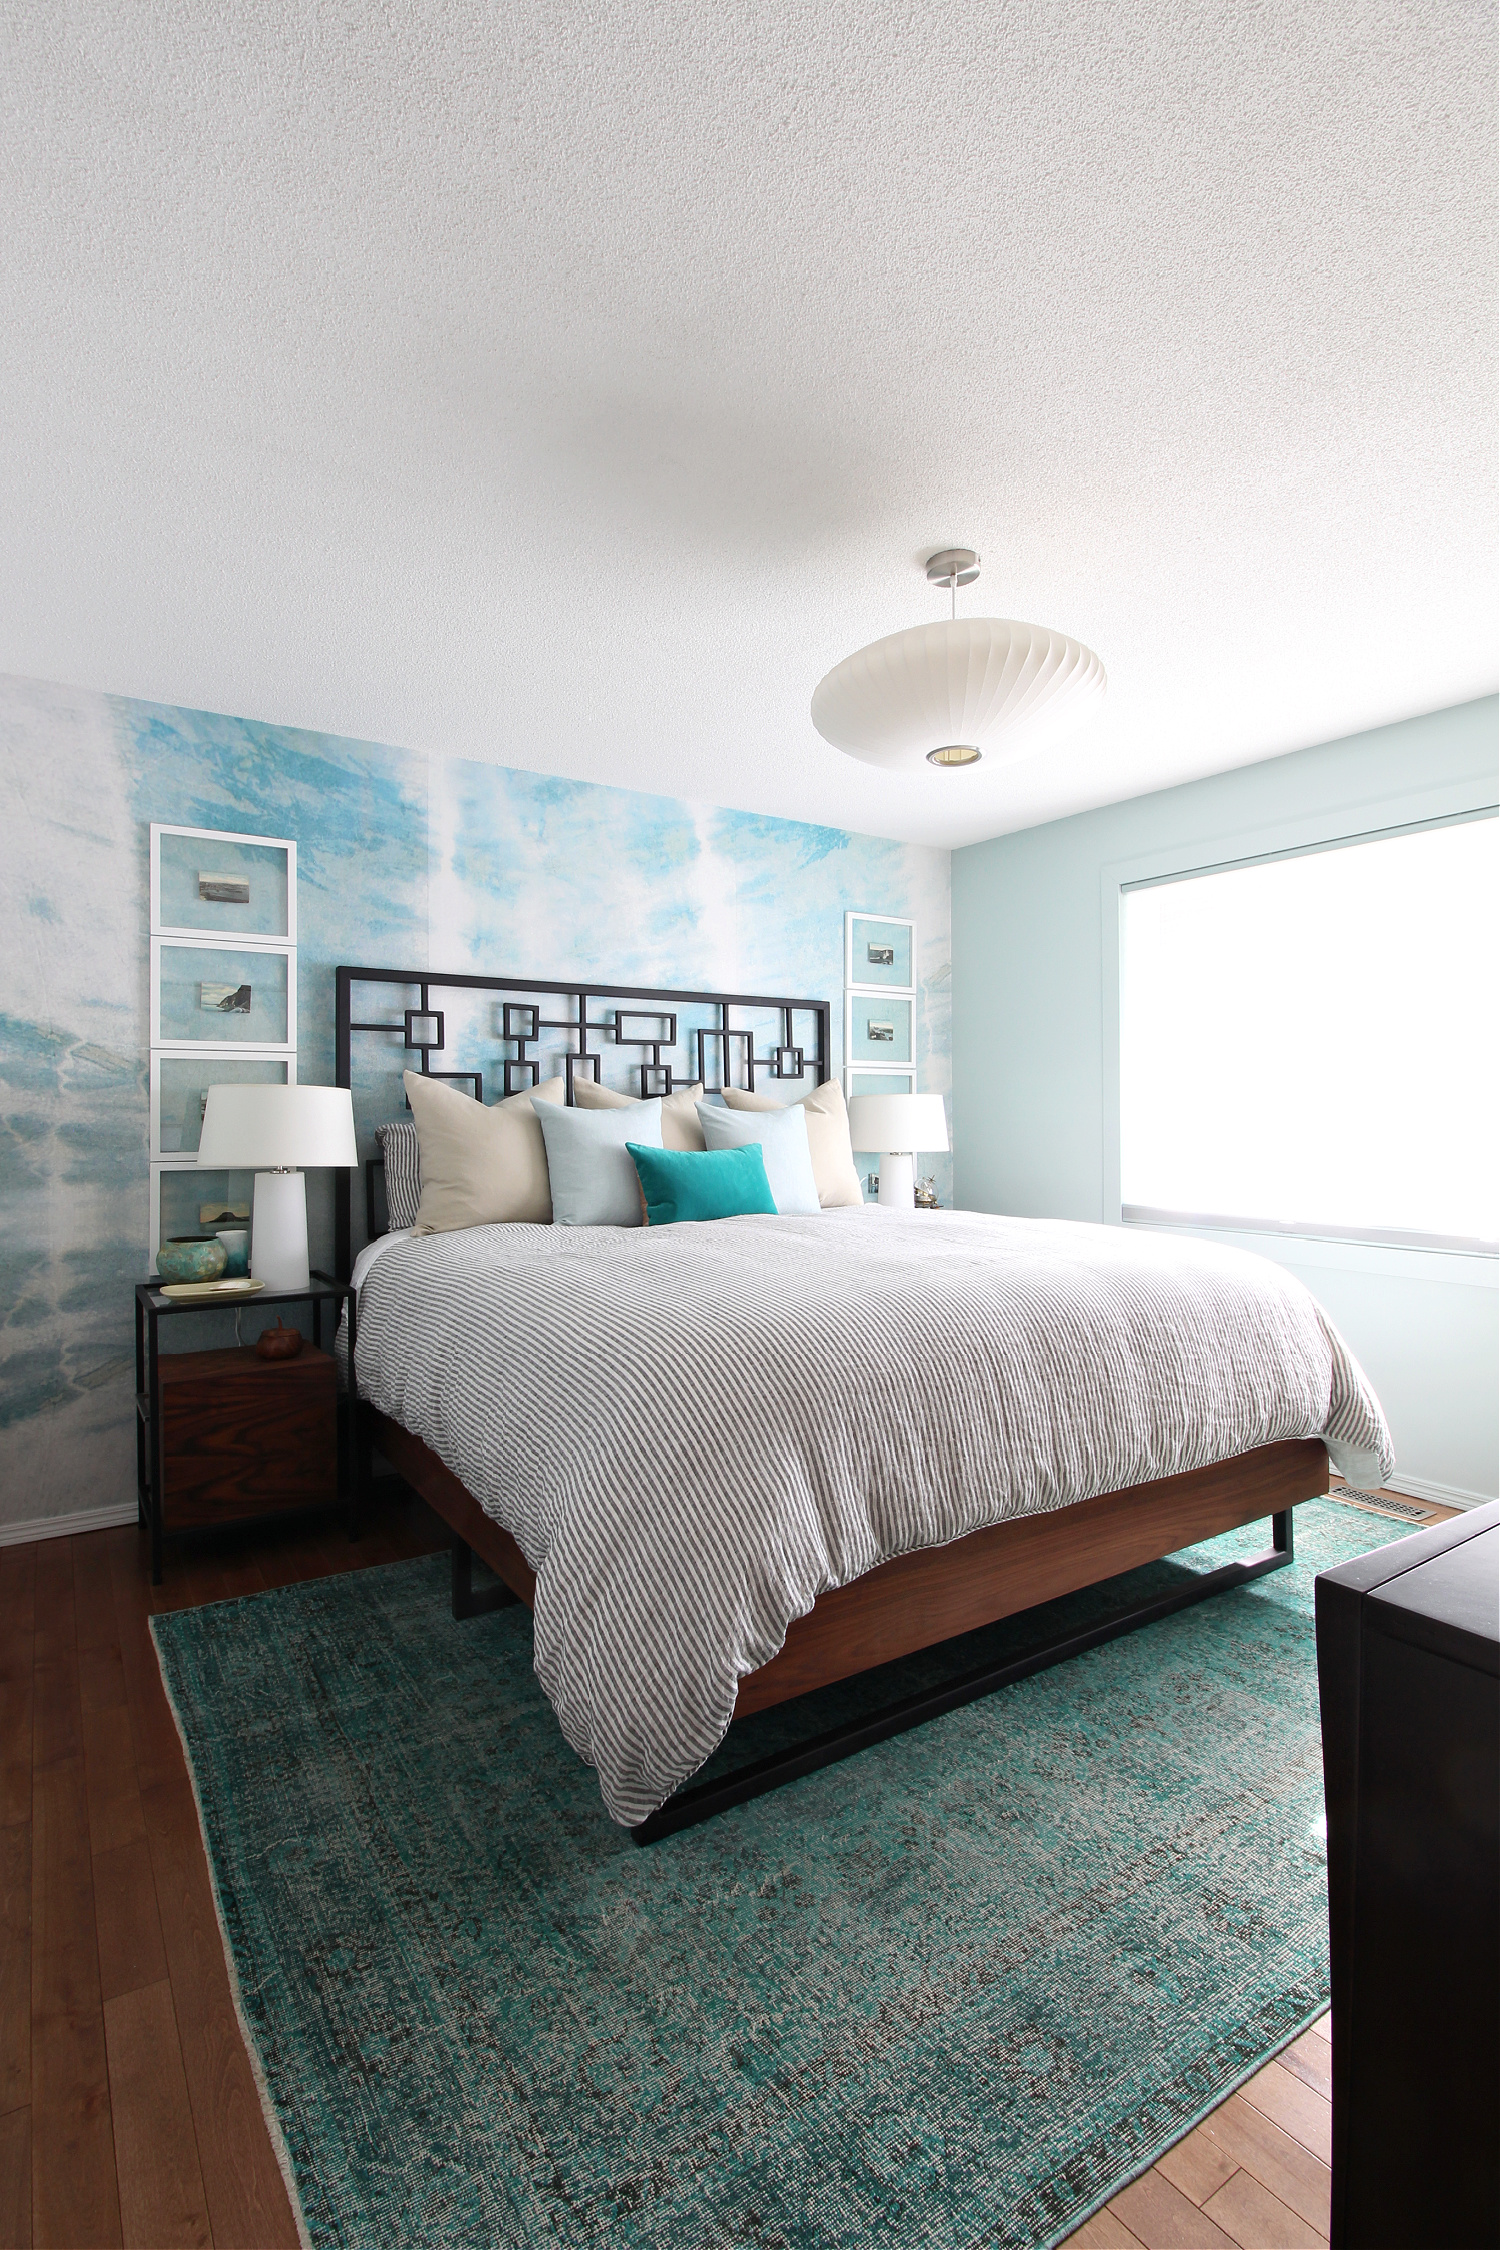 Teal Tie Dyed Wall Treatment